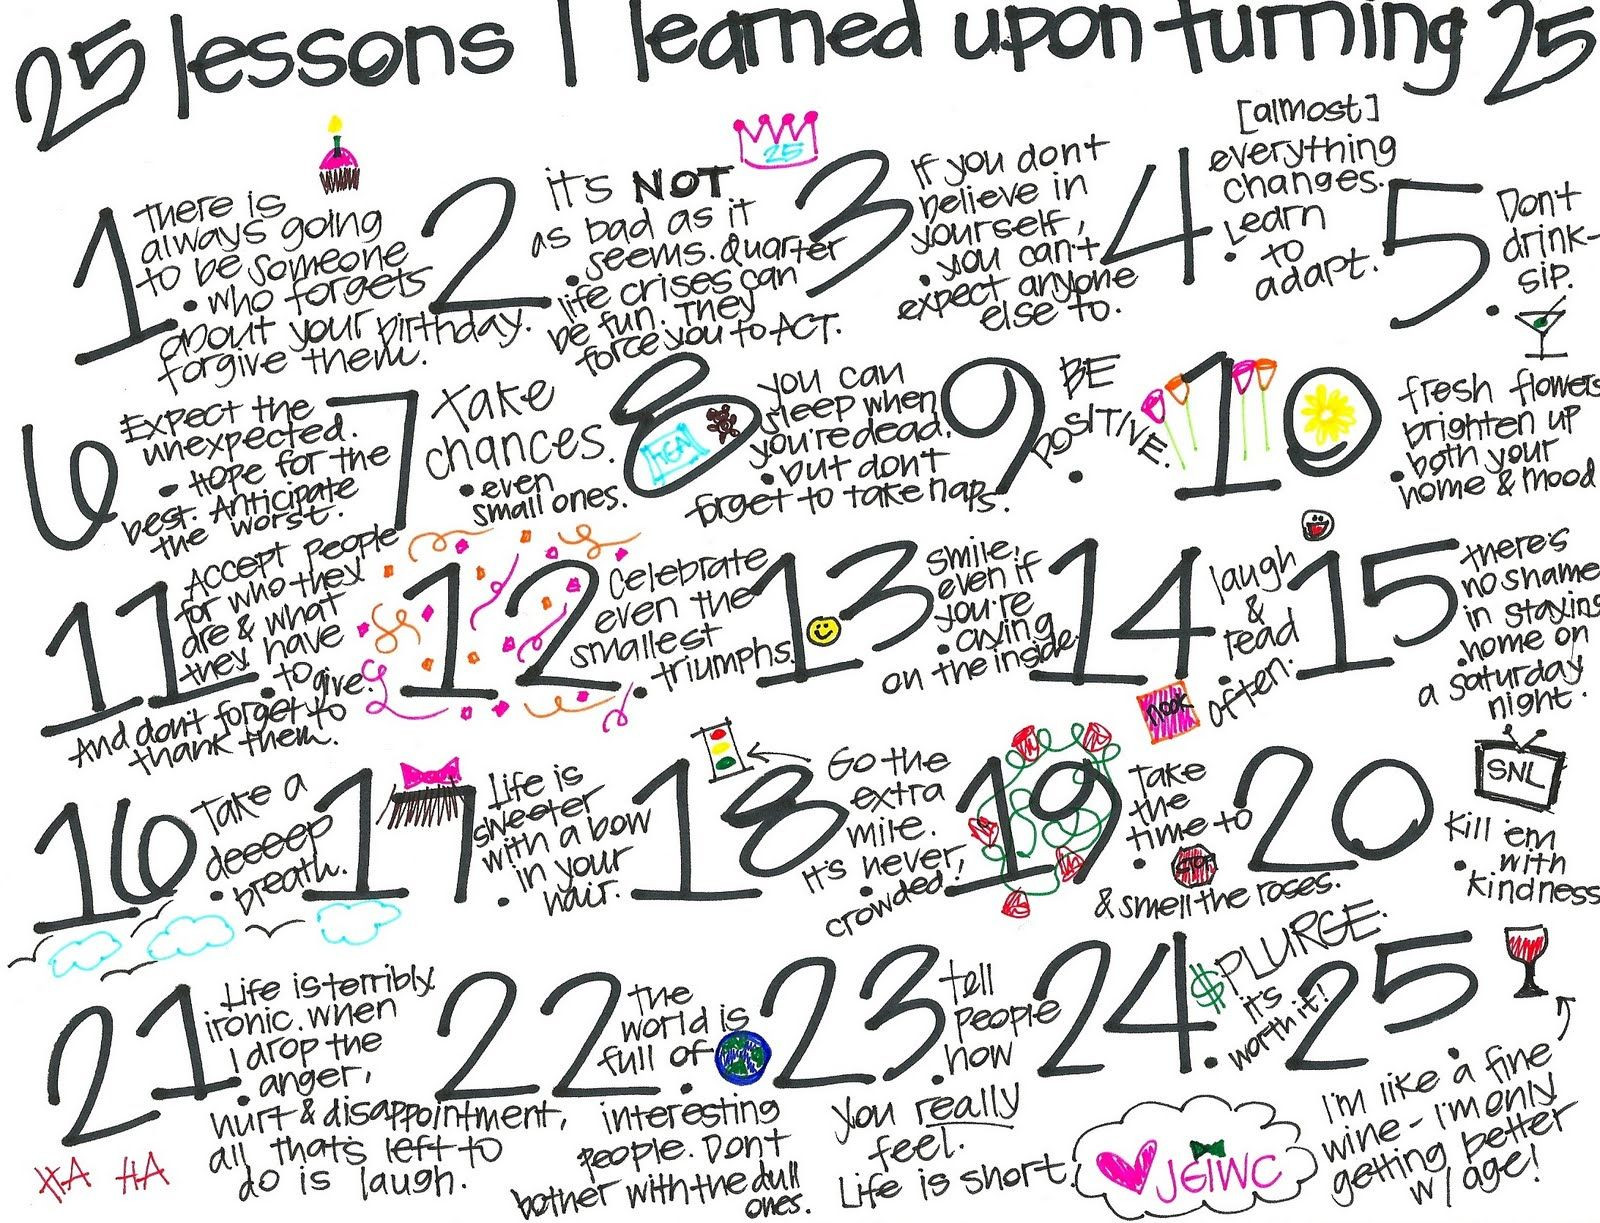 Turning 25 Birthday Quotes
 "25 lessons I learned upon turning 25" I am proud to say